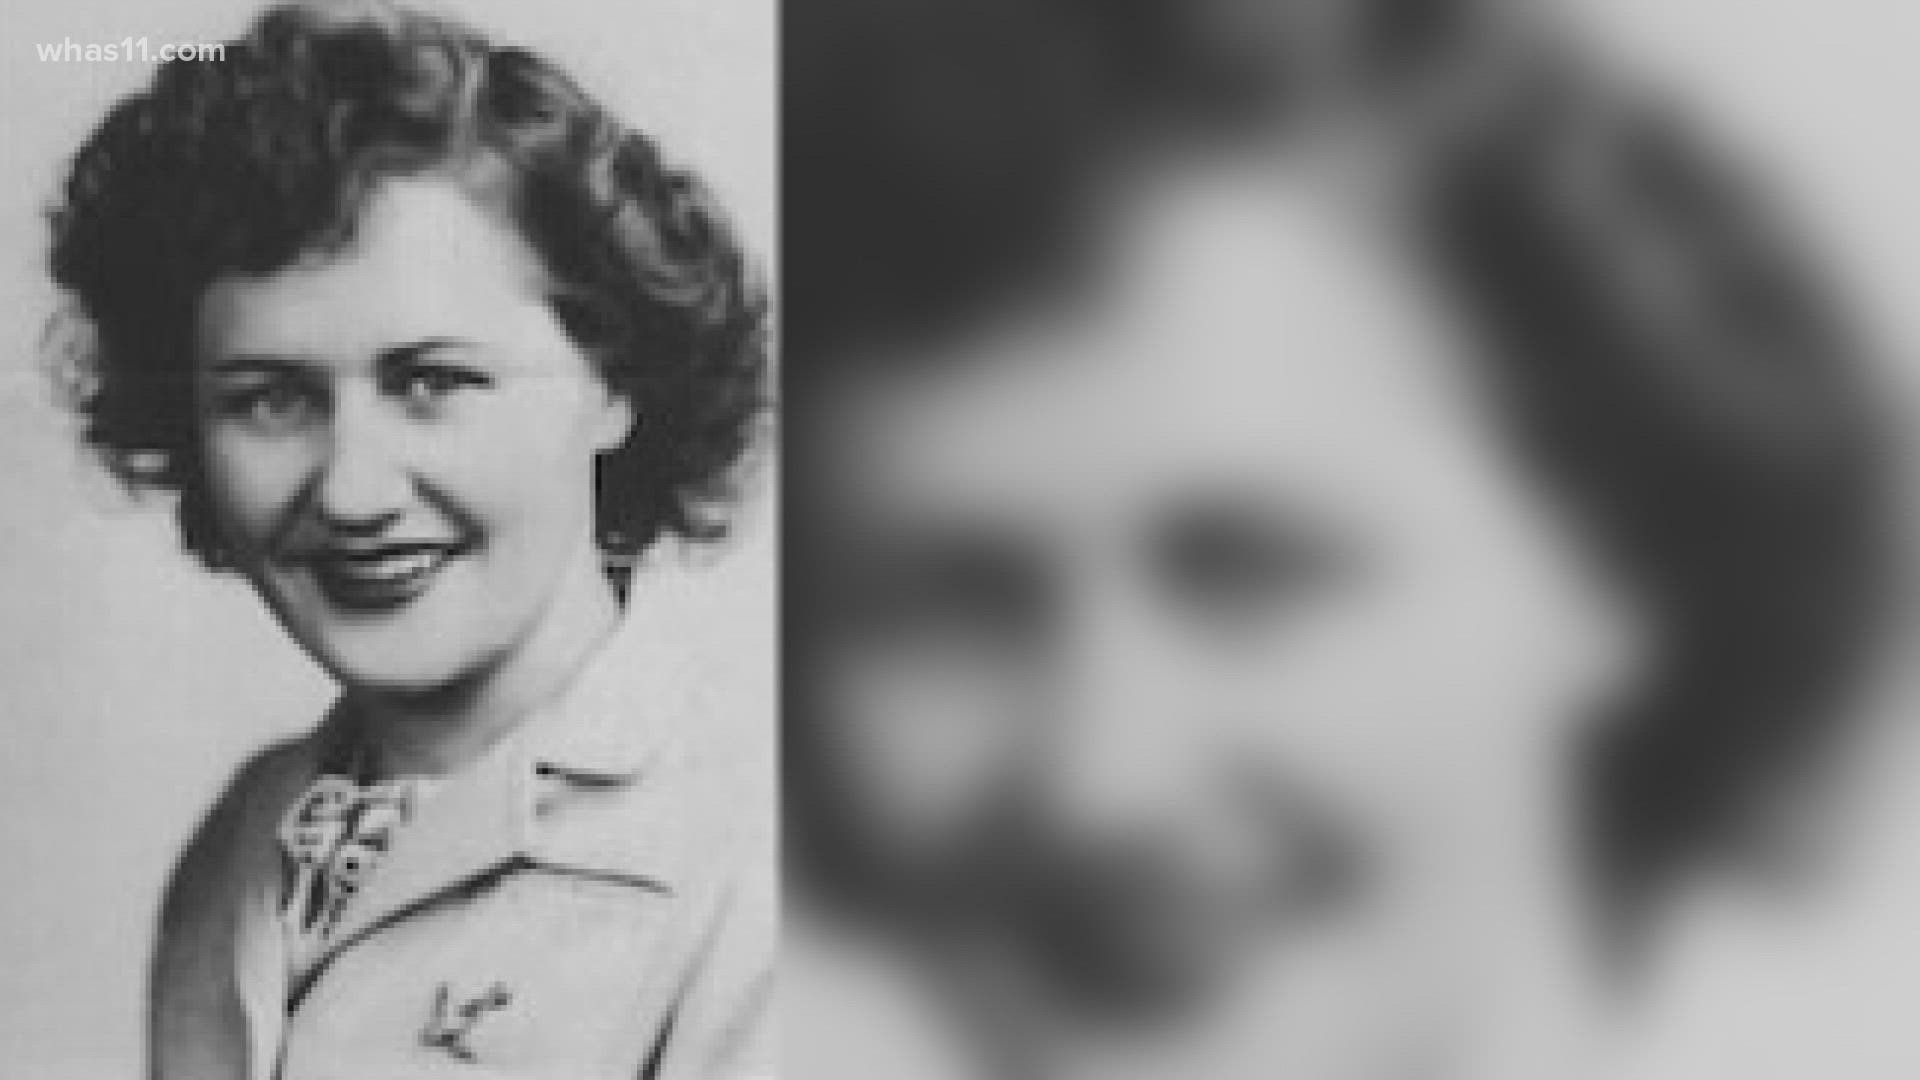 Rose Will Monroe was a woman who got things done. She appeared in World War II films and was one of the original inspiration for "Rosie the Riveter."